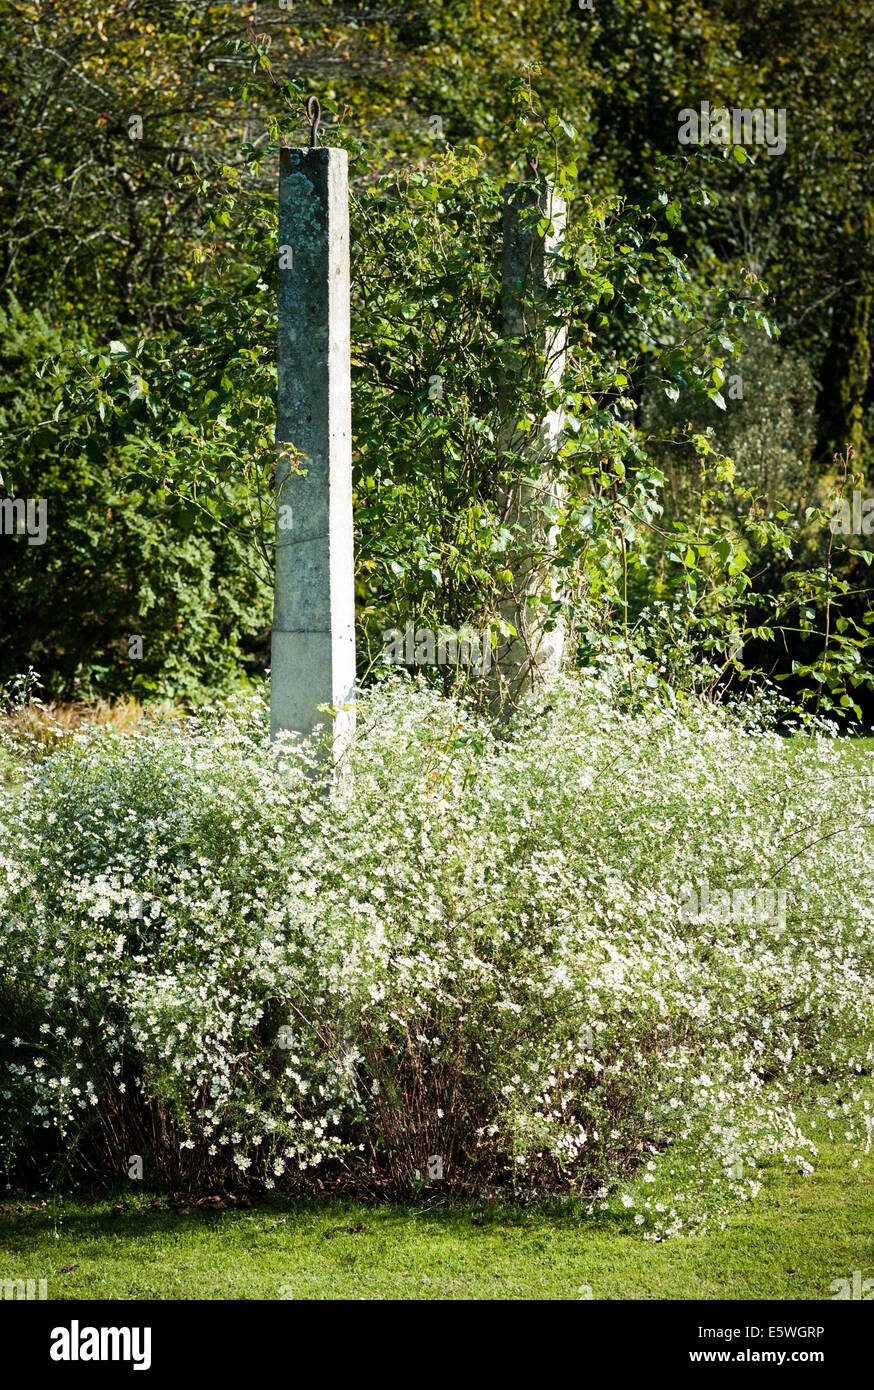 Bed of asters and historic columns in an English garden Stock Photo